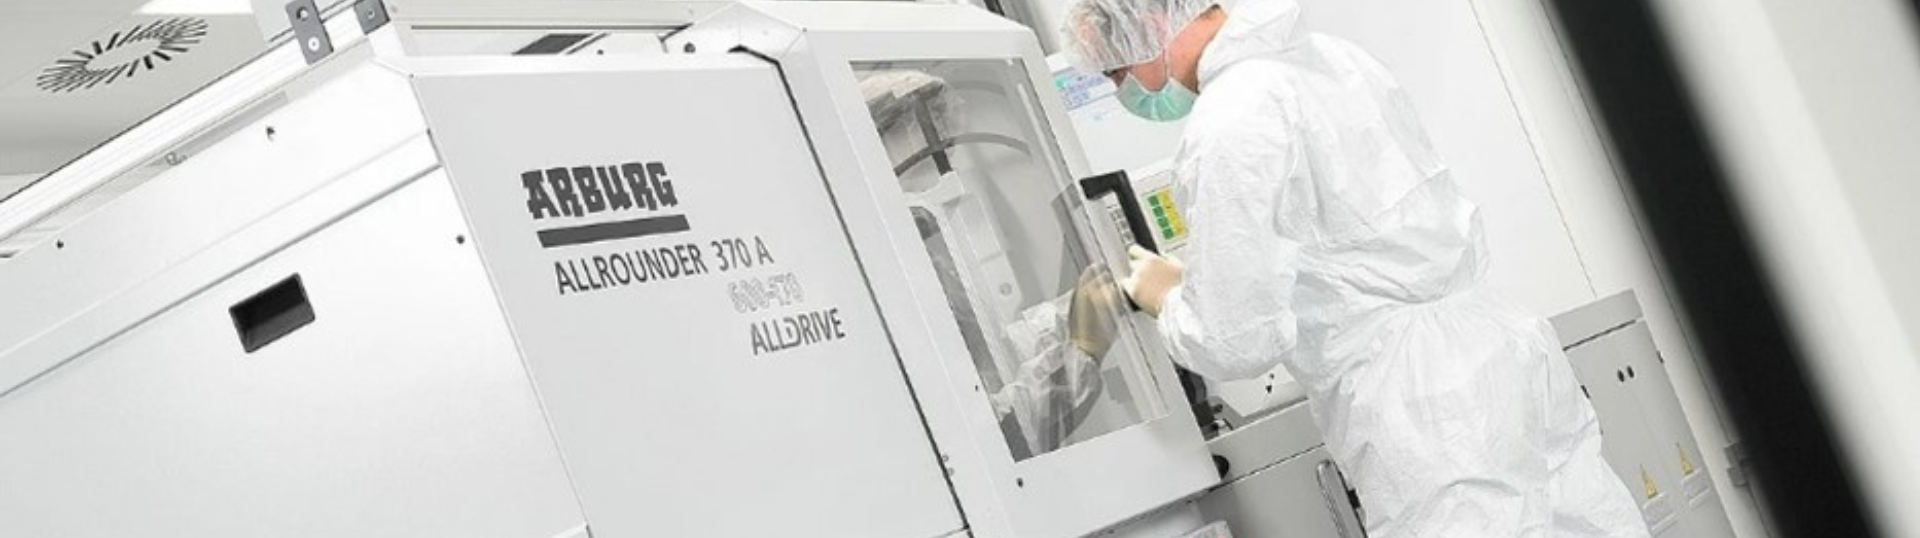 ARBUG's expertise in medical clean-room know-how combines technology, knowledge, and a deep commitment to quality and innovation.